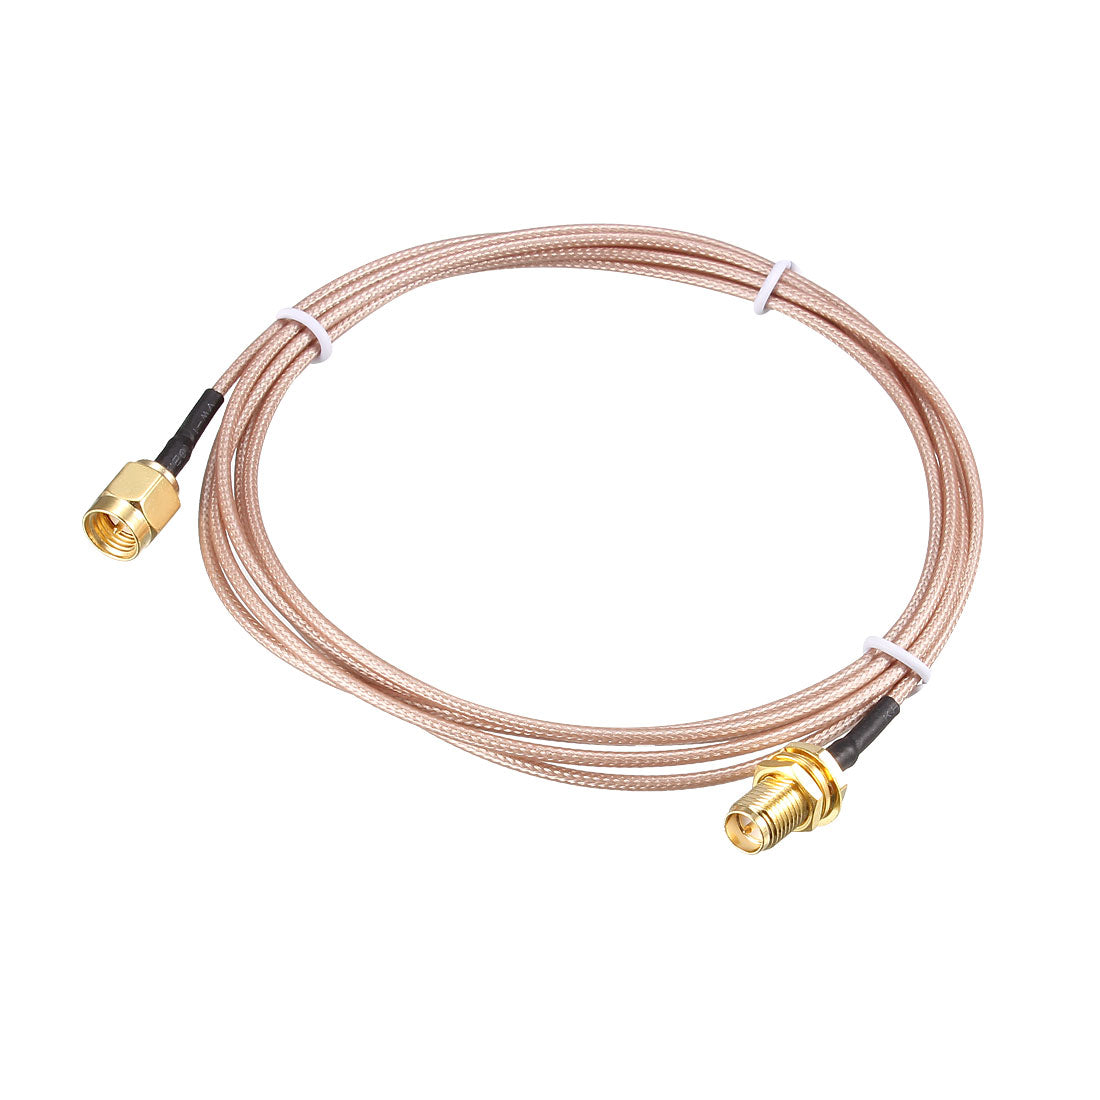 Uxcell Uxcell Low Loss RF Coaxial Cable Connection Coax Wire RG-178 SMA Male to RP-SMA Female 1.6ft